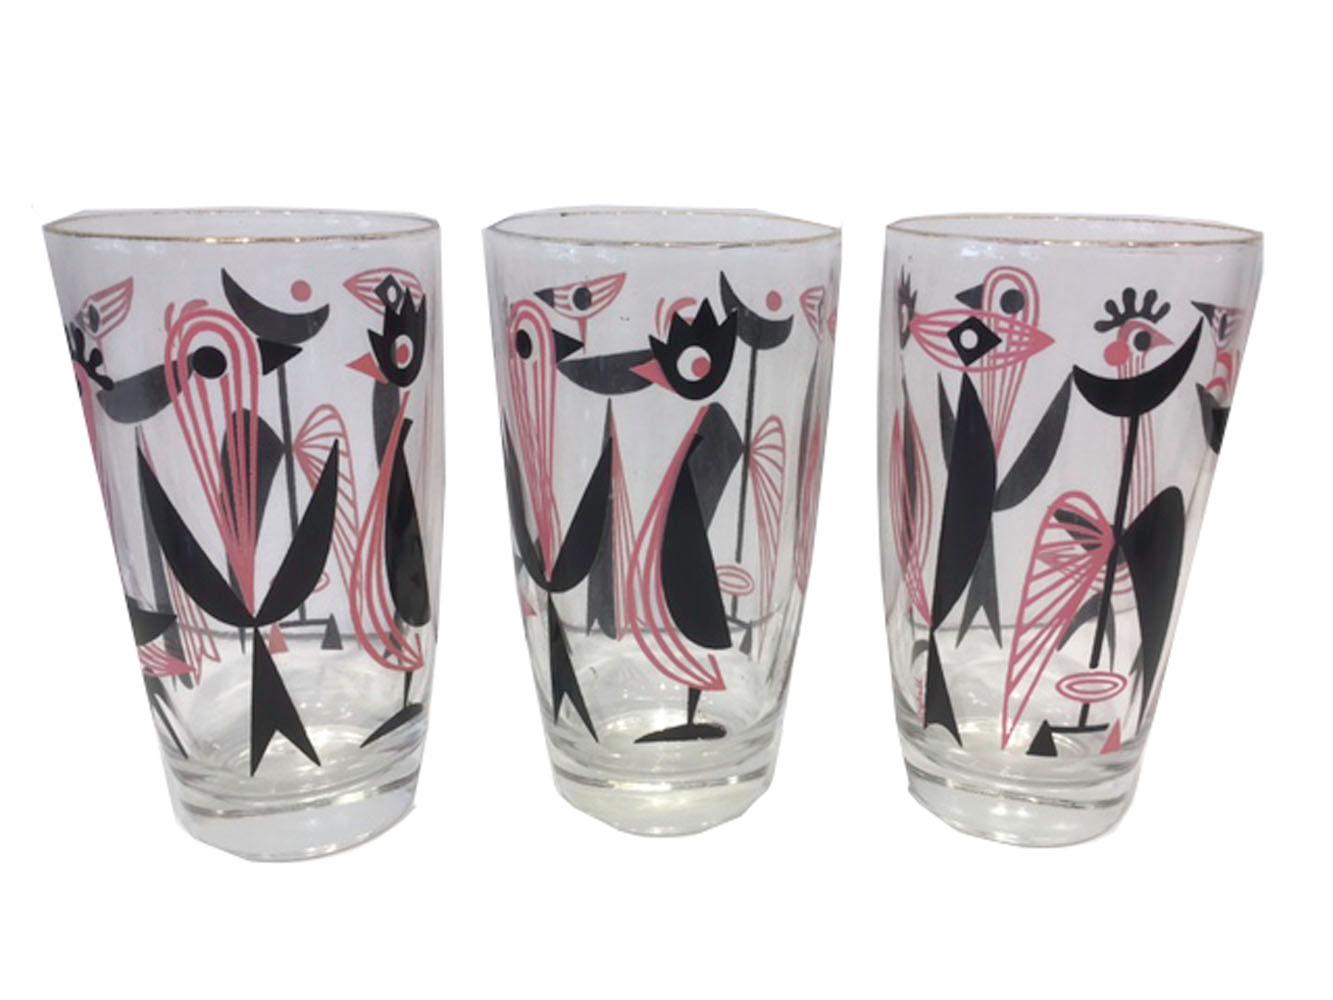 Enameled Vintage Art Deco 11 Piece Dyball Cocktail Set with Pink and Black Stylized Birds